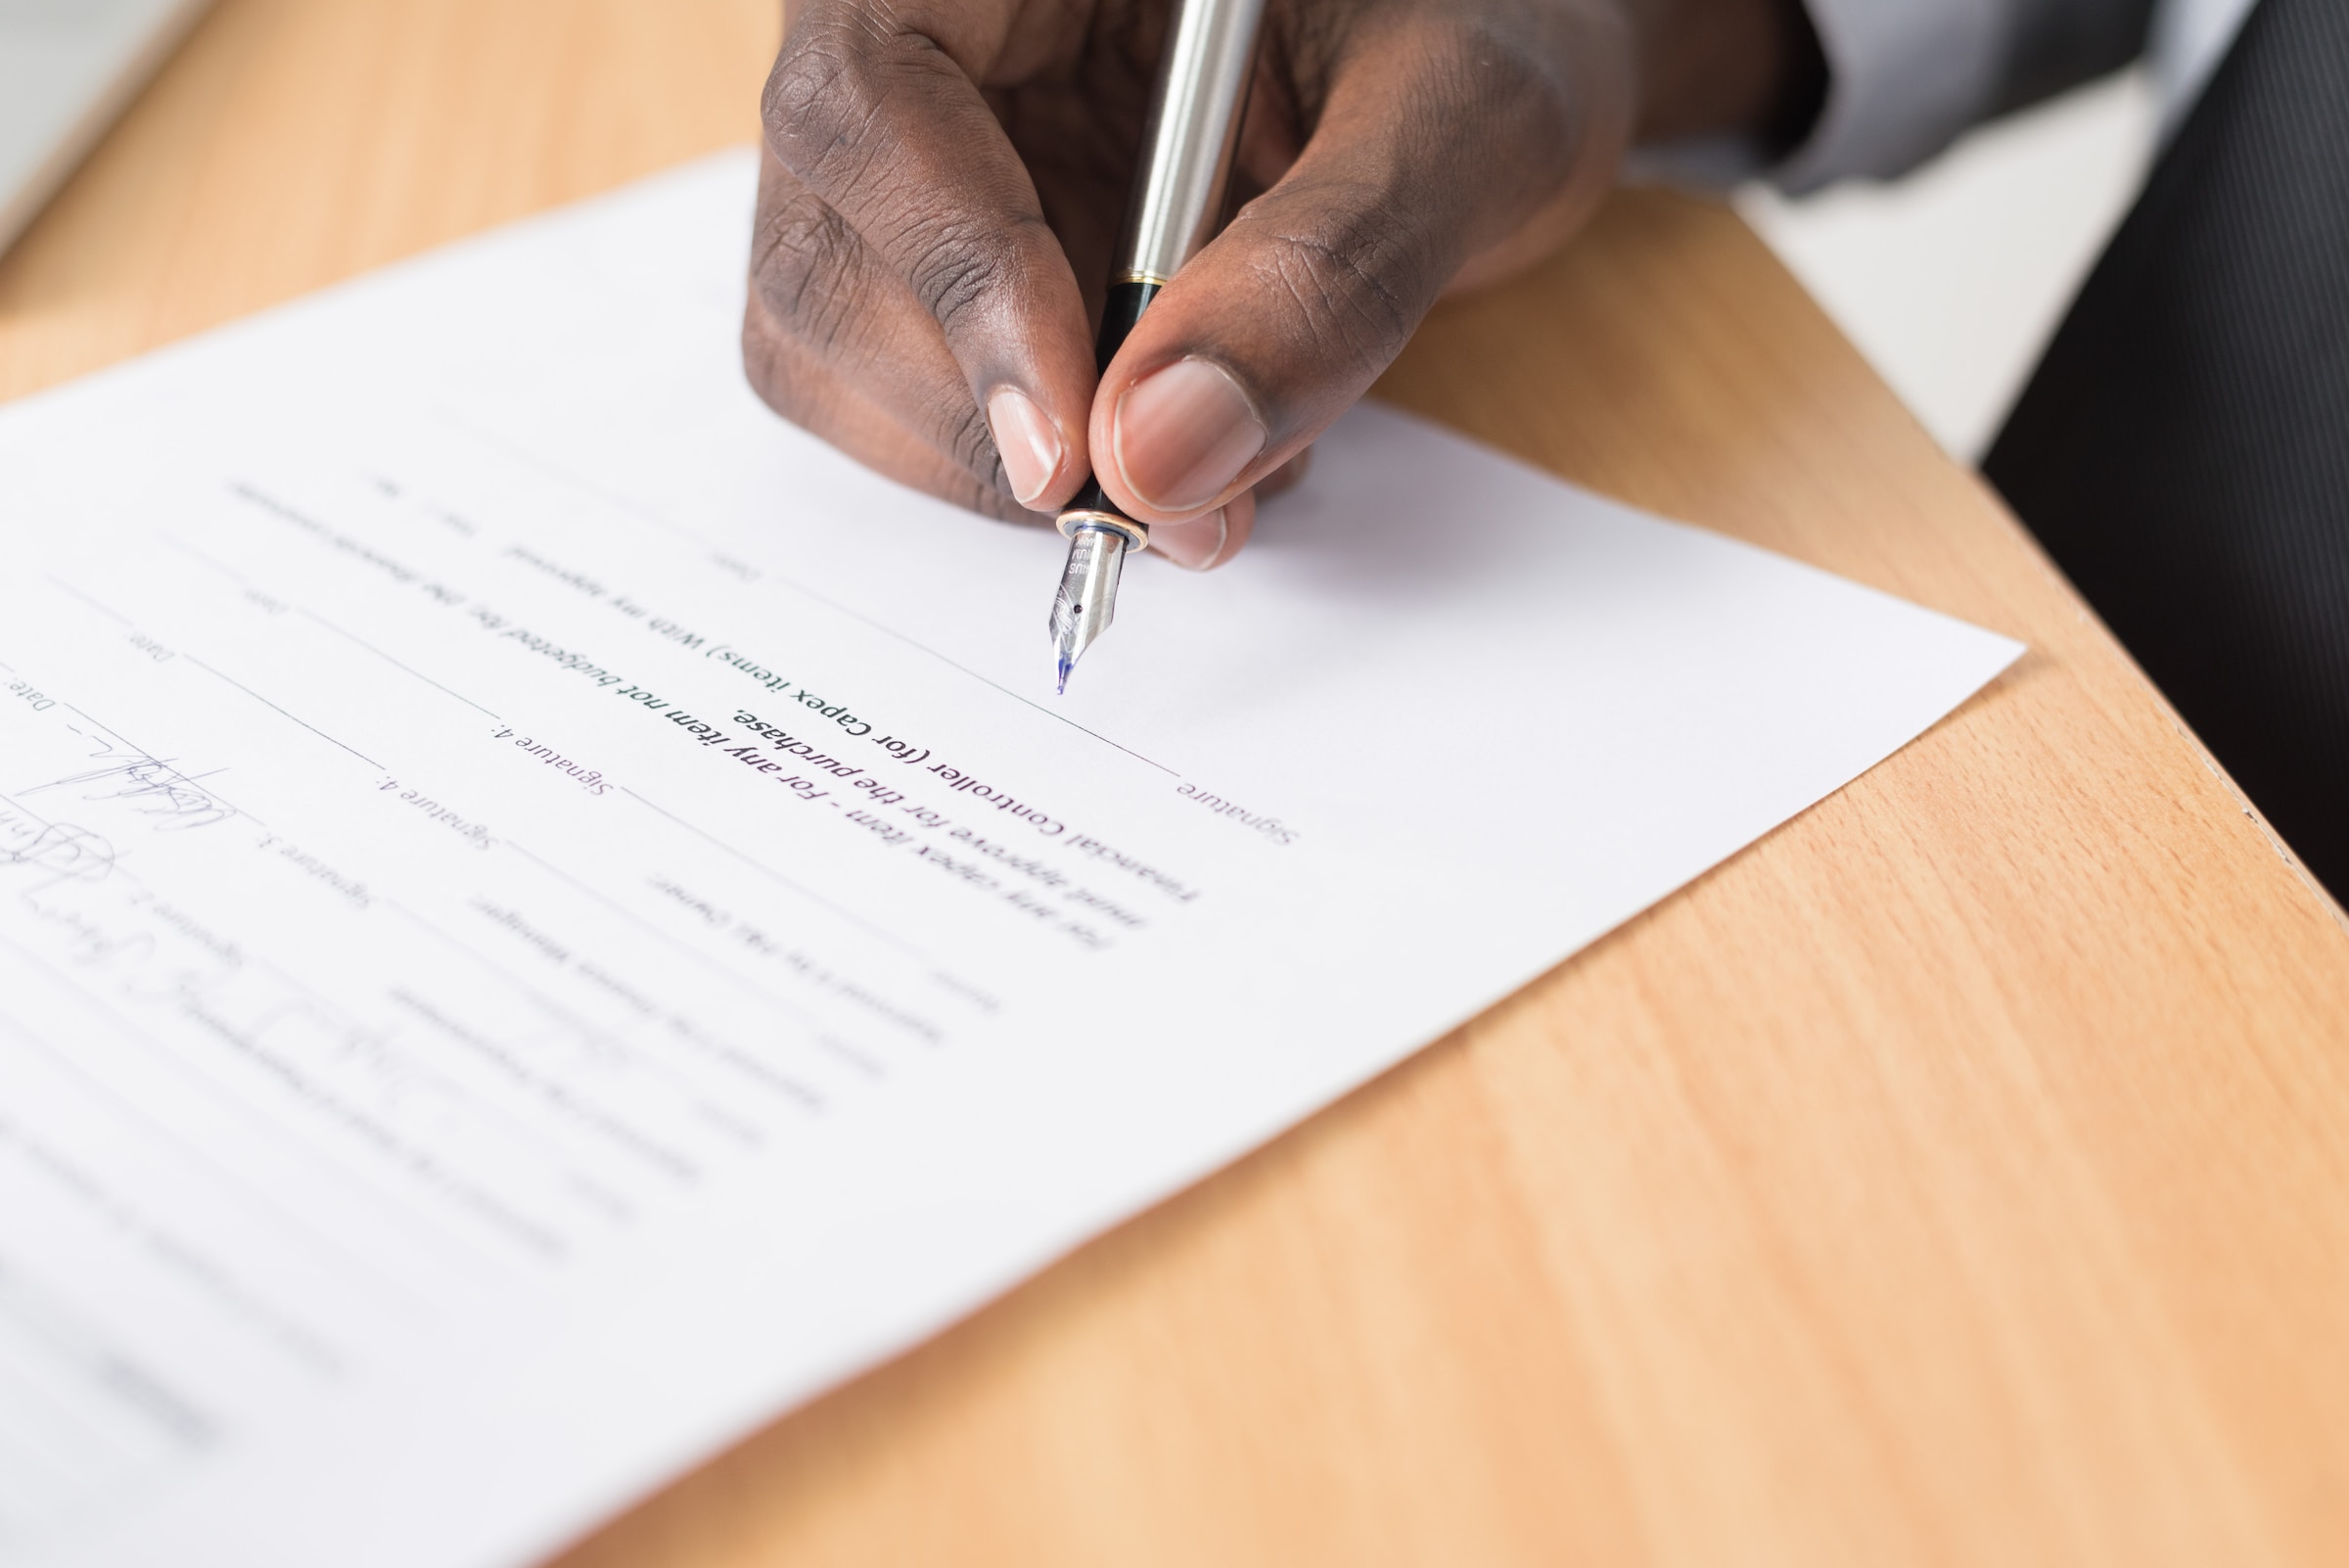 How To Successfully Draft A Business Contract With Limited Experience